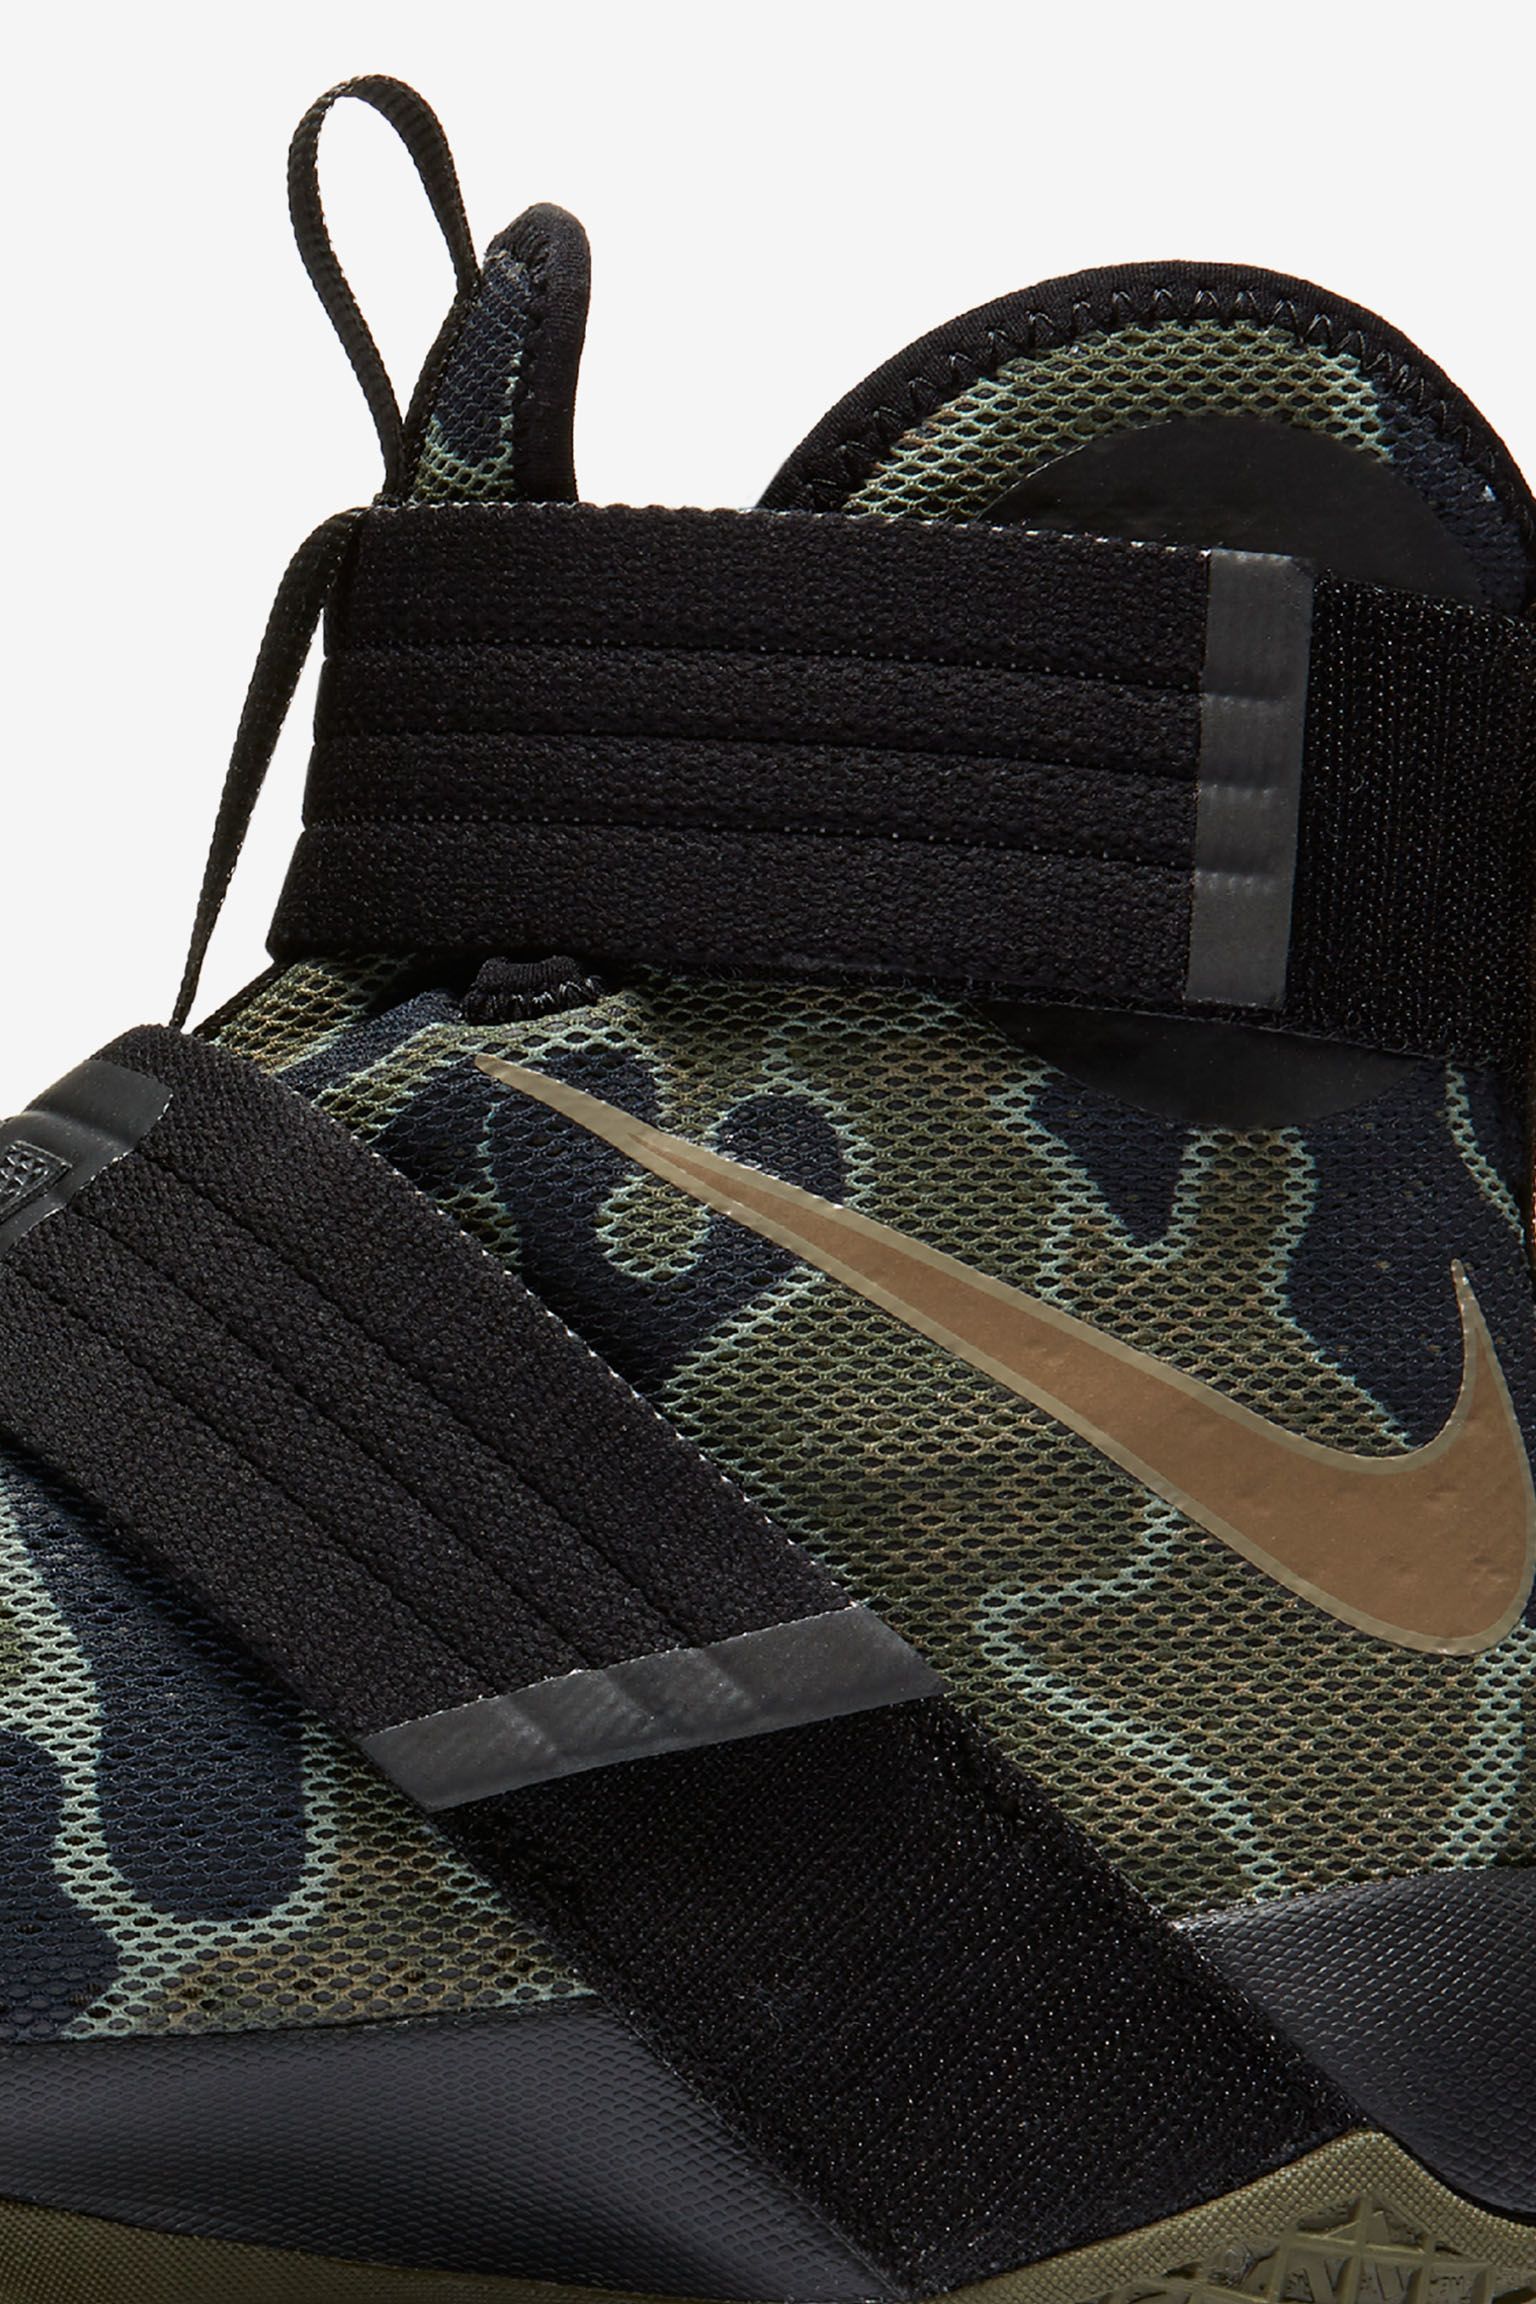 eje hecho Monje Nike Zoom LeBron Soldier 10 'Camo' Release Date. Nike SNKRS